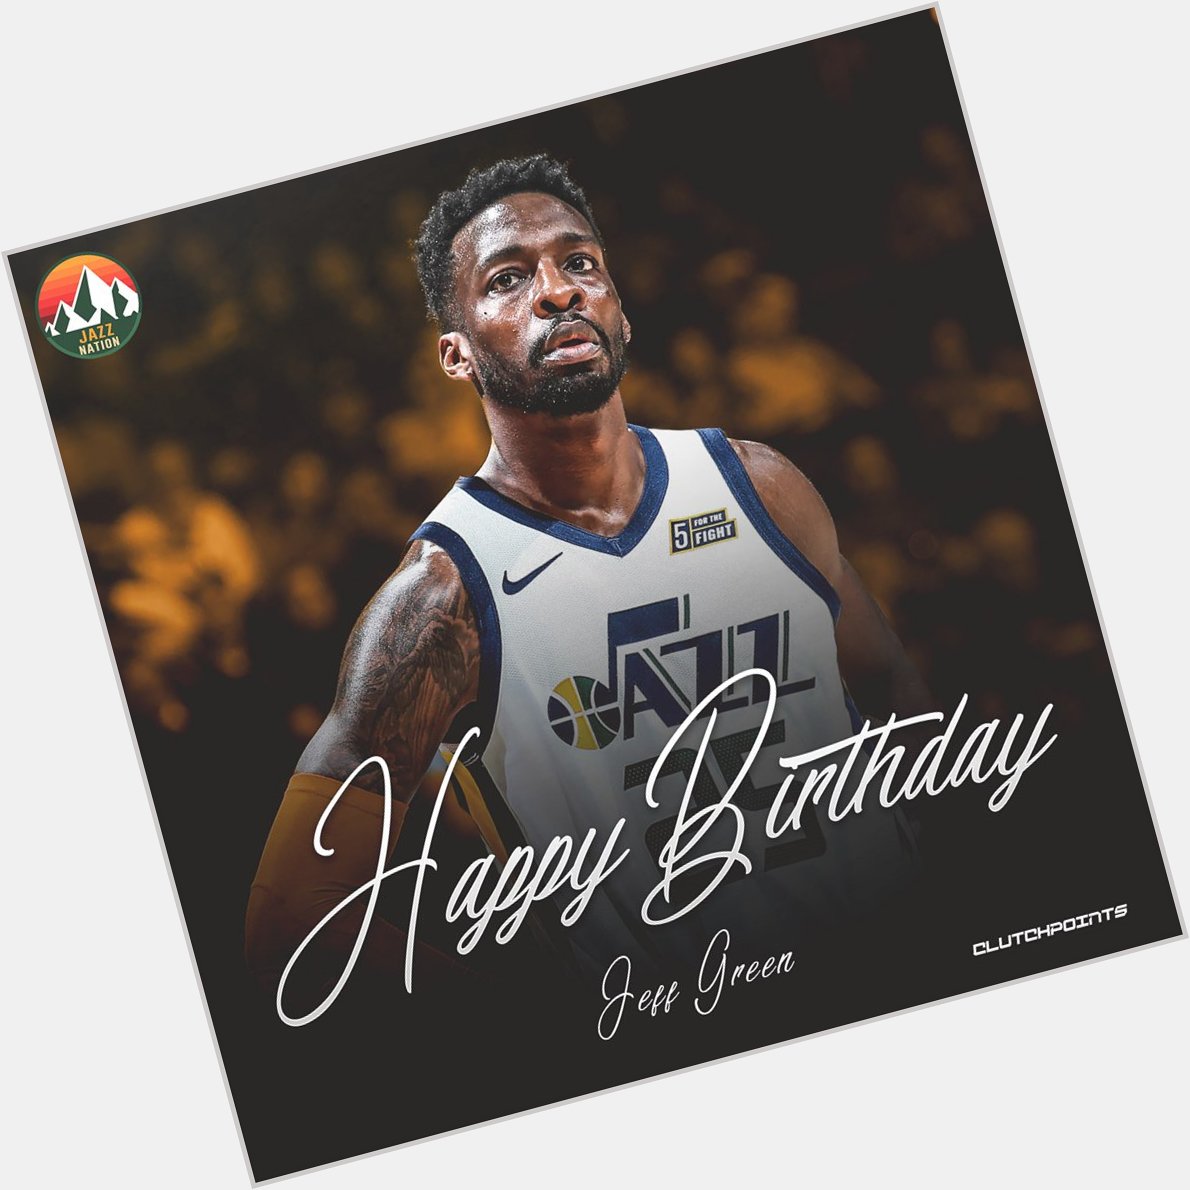 Join Jazz Nation in wishing Jeff Green a happy 33rd birthday!    